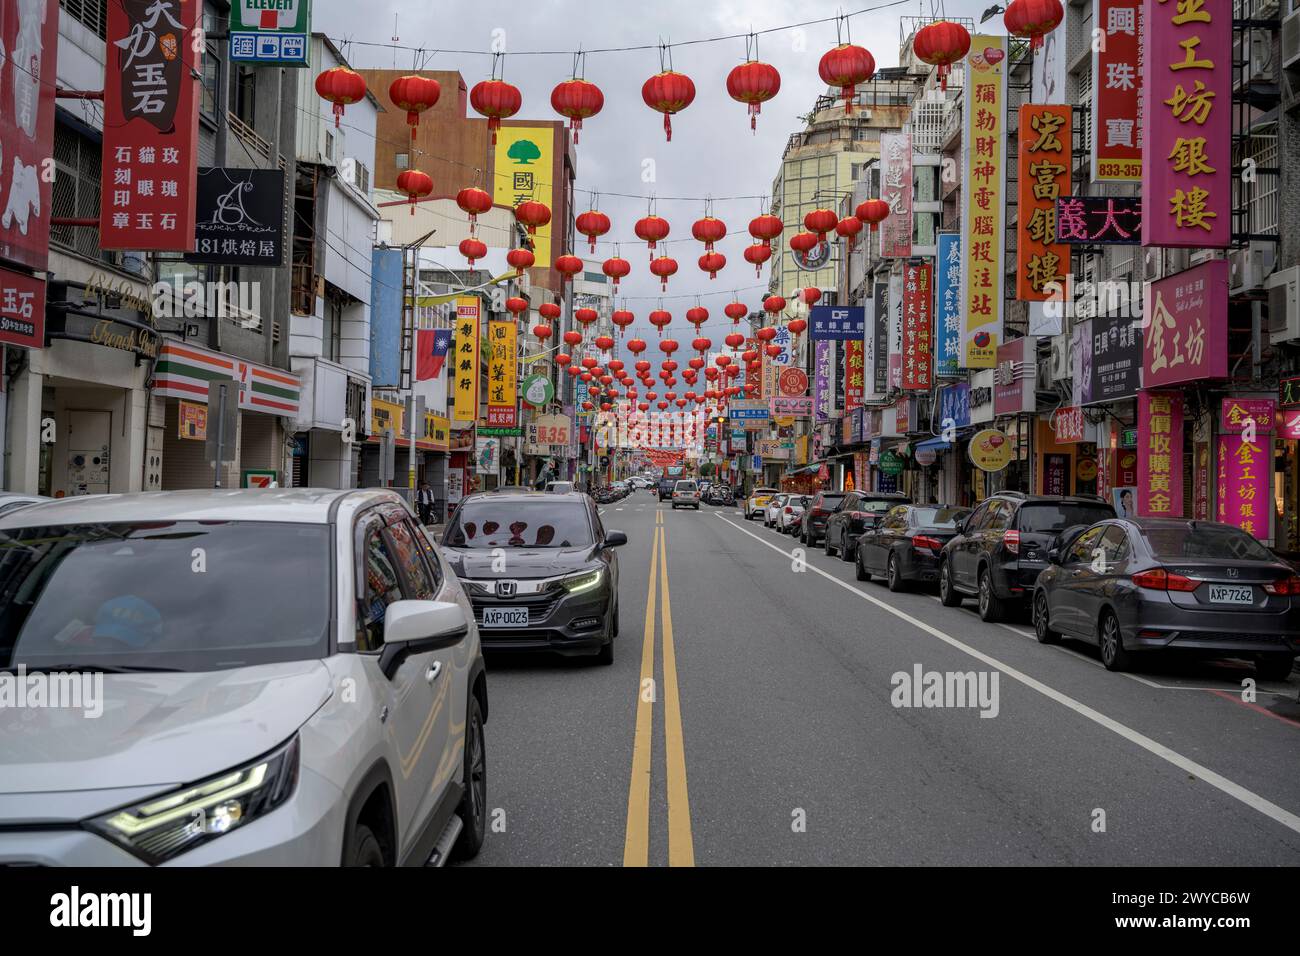 A bustling street scene captures the vibrant essence of an urban district with red lanterns hung above, signaling festivity or cultural celebration Stock Photo